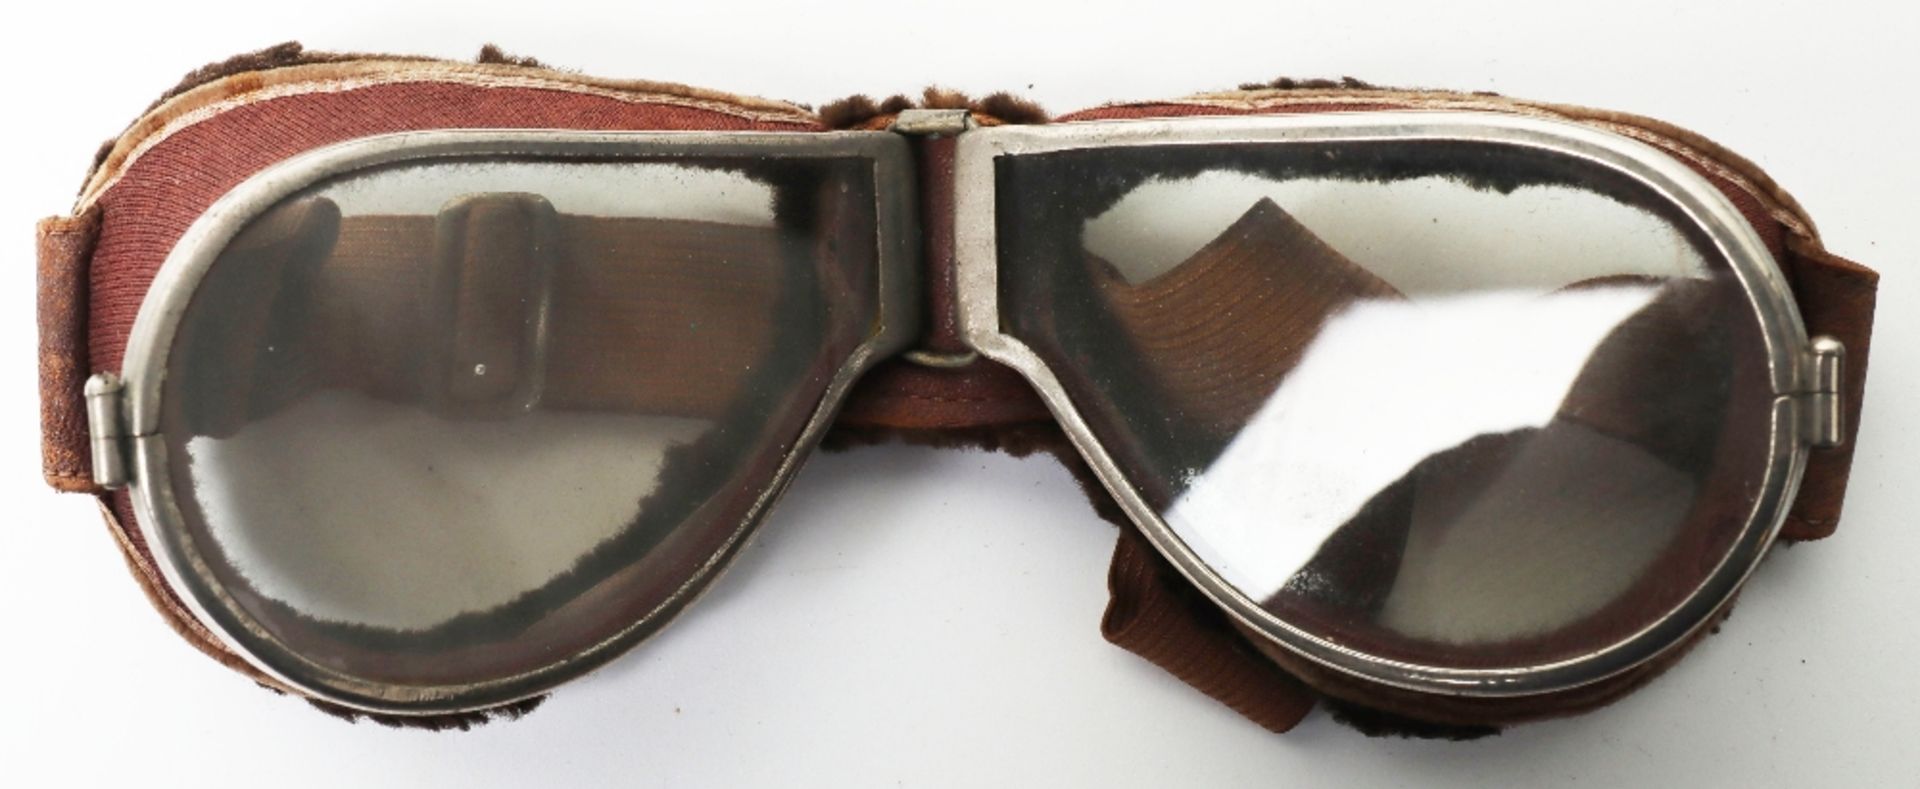 Five Pairs of Aviators Flying Goggles - Image 5 of 7